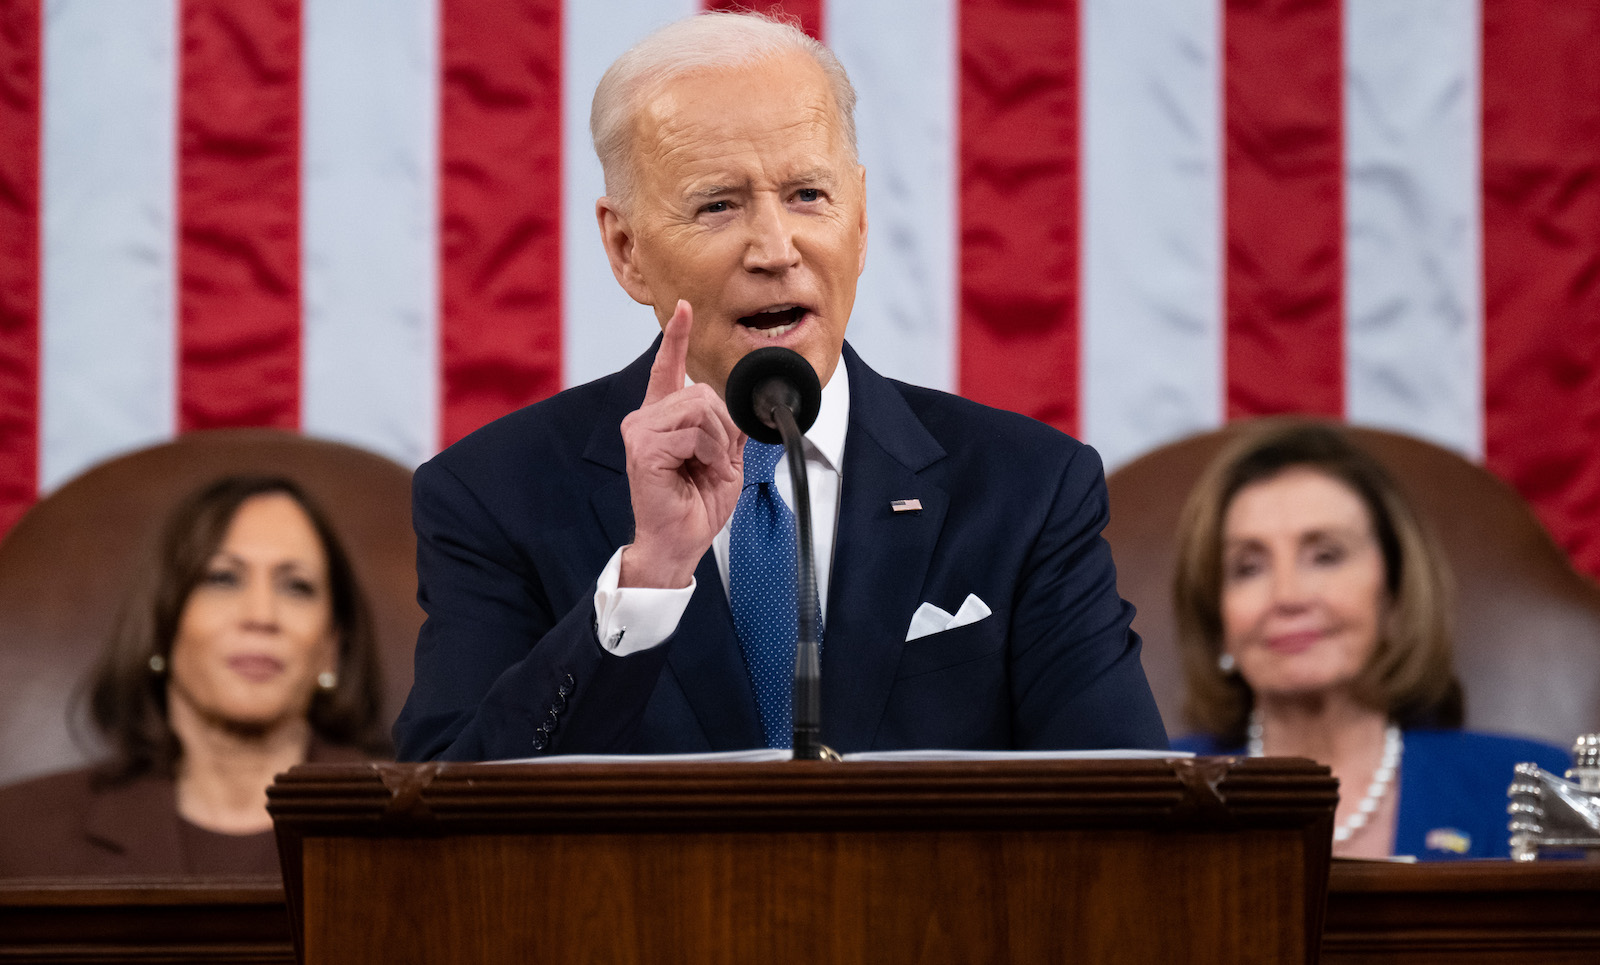 joe biden gestures with one hand in front of a podium during the 2022 state of the union speech while two women (kamala harris, left, and nancy pelosi, right) in suits sit behind him on either side